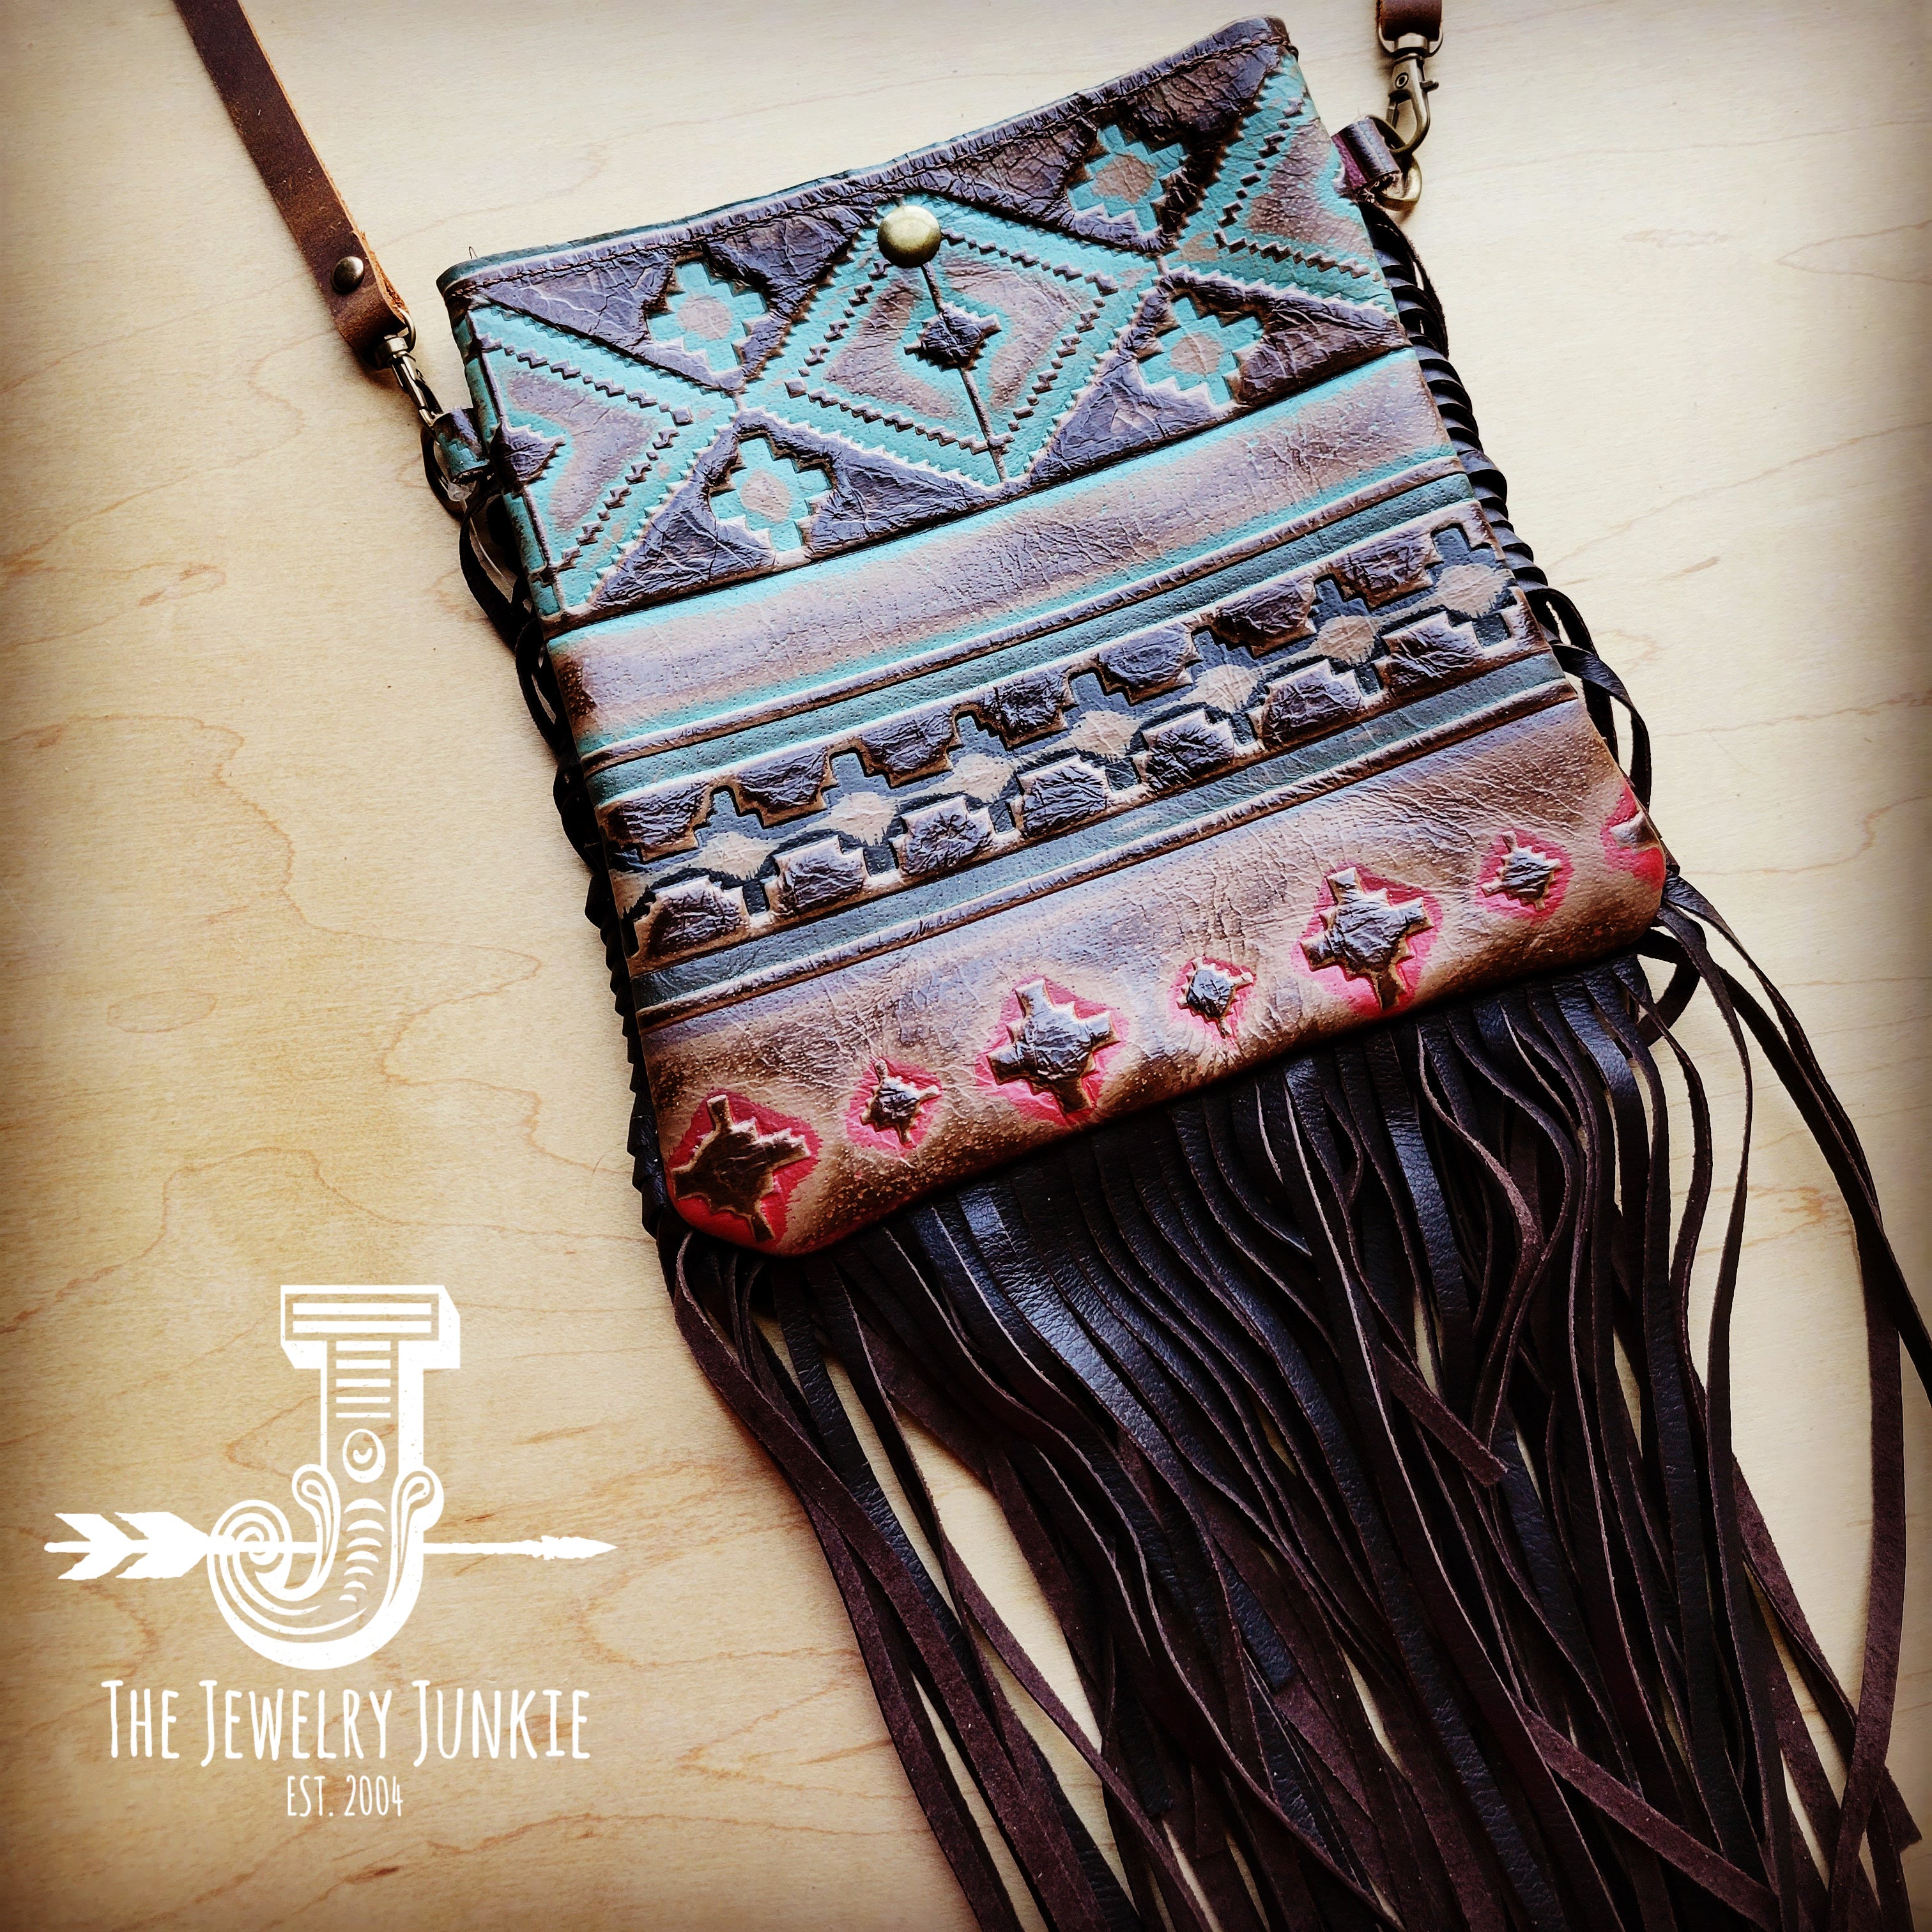 Turquoise Leather Bag With Fringe Detail - Small & Round – Indian